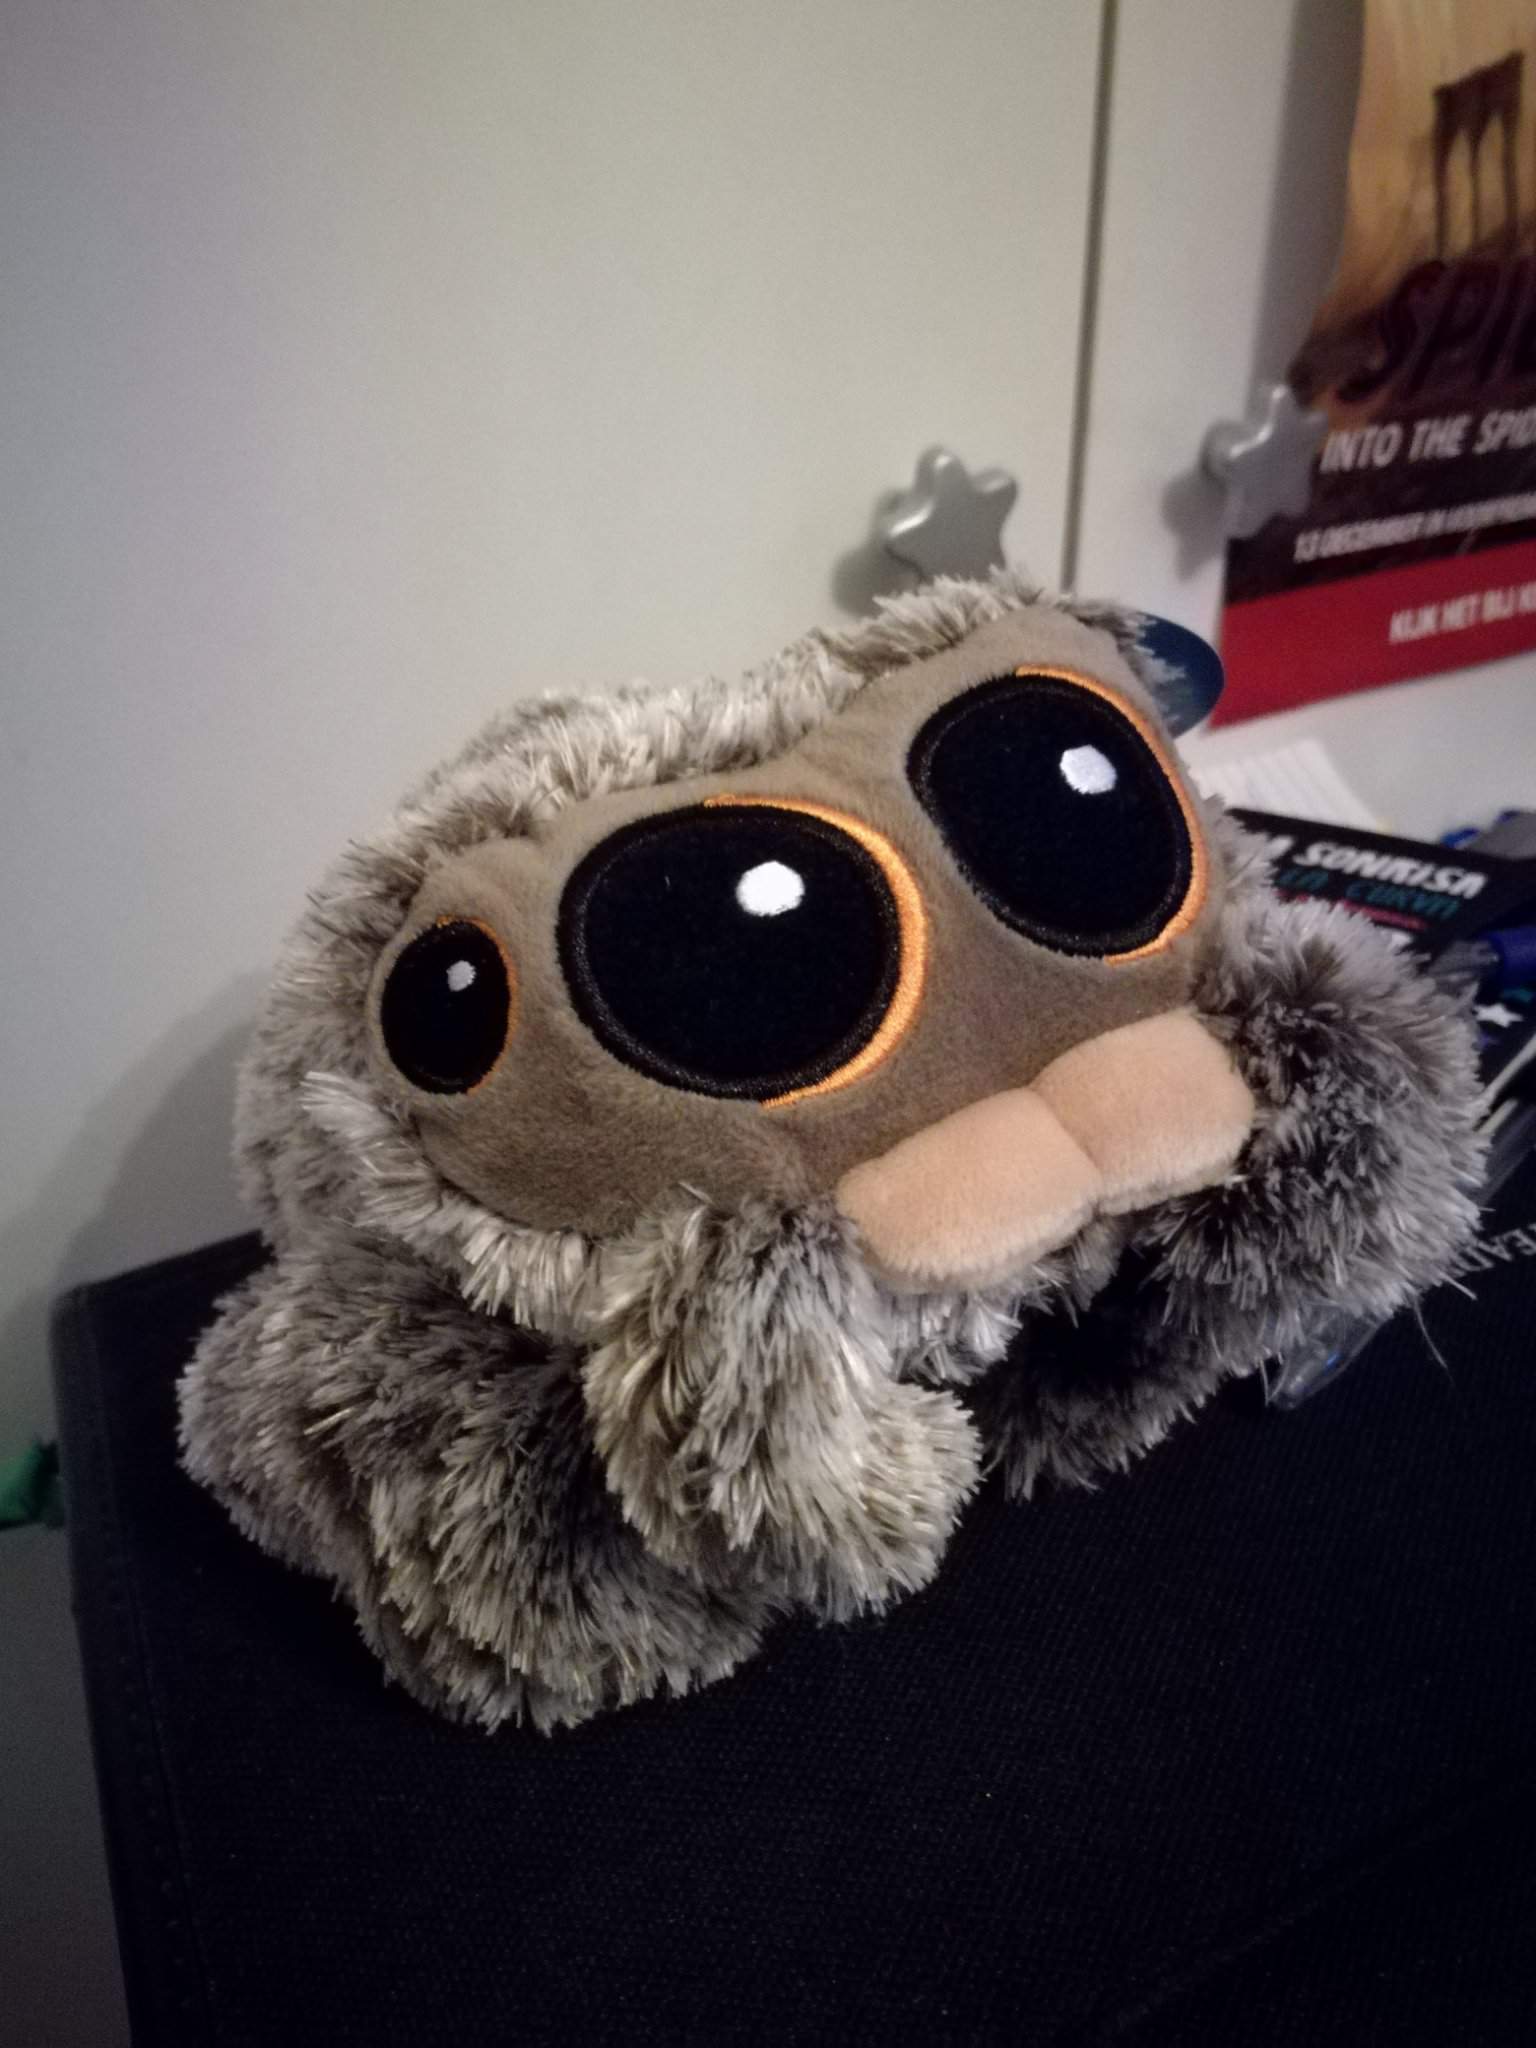 lucas the spider plush toy